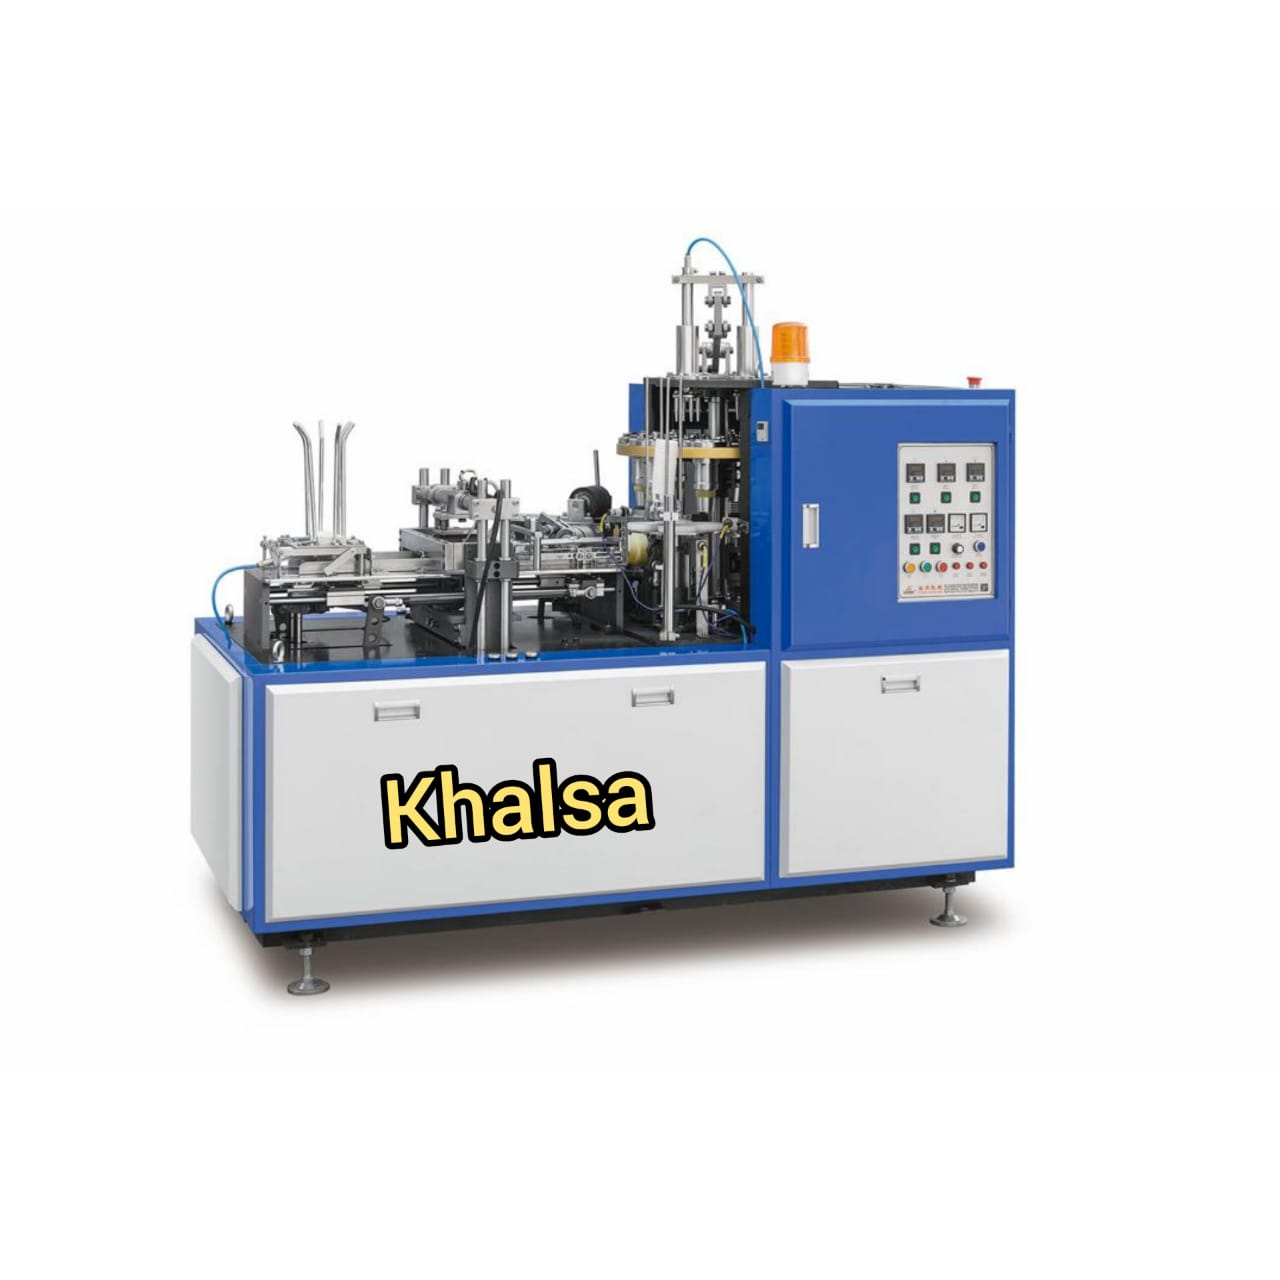 High Speed Paper Cup Making Machine Manufacturers, Suppliers Delhi, India